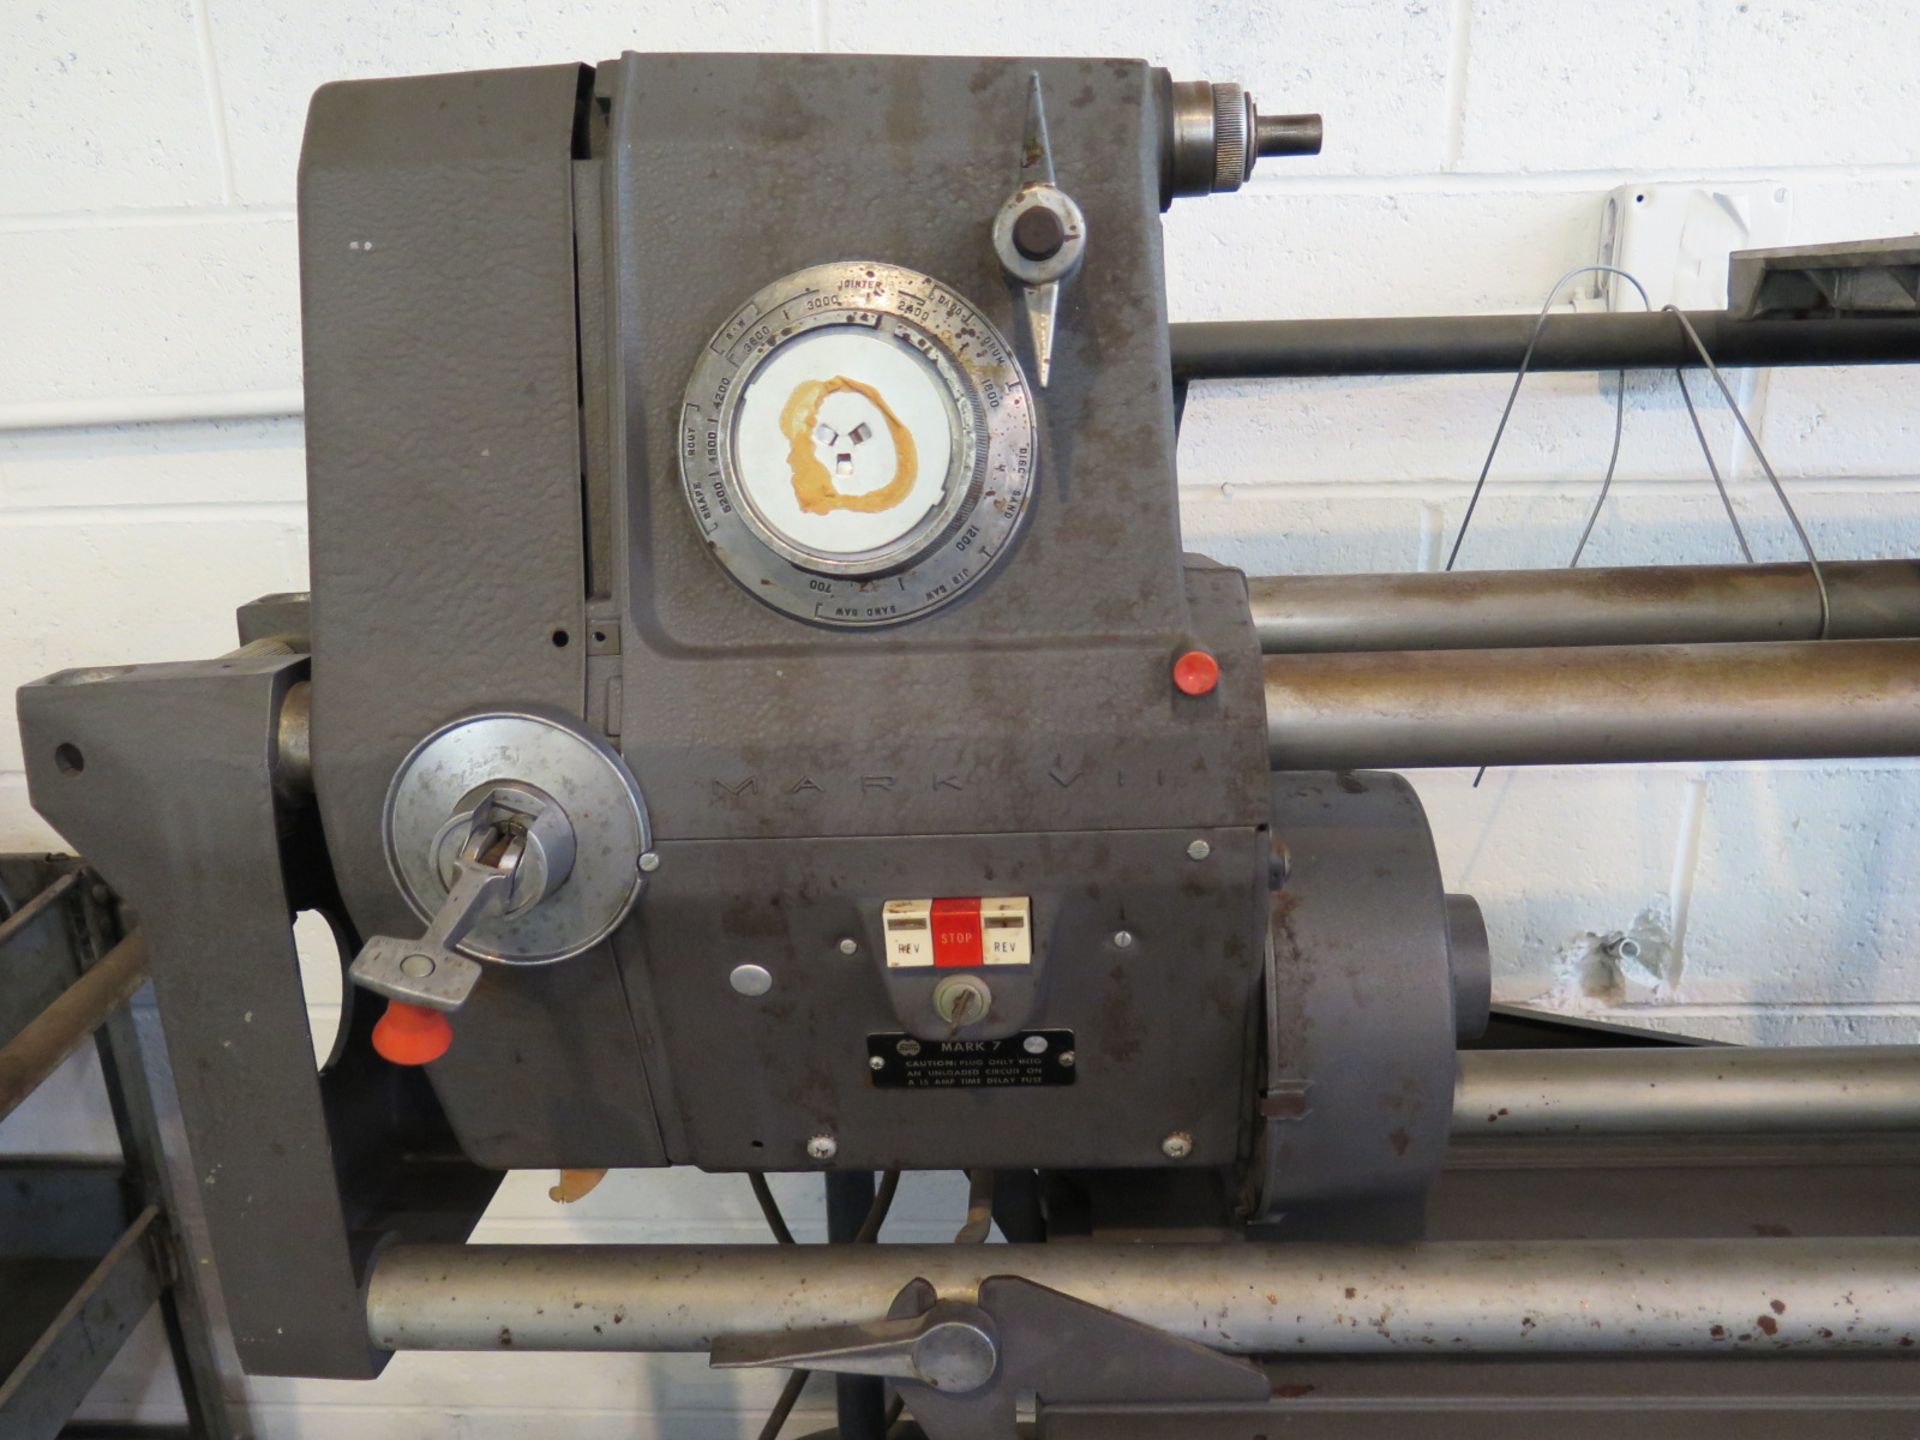 Shop-Smith Mark VII Lathe/Saw/Drill s/n 408074 - Image 2 of 3